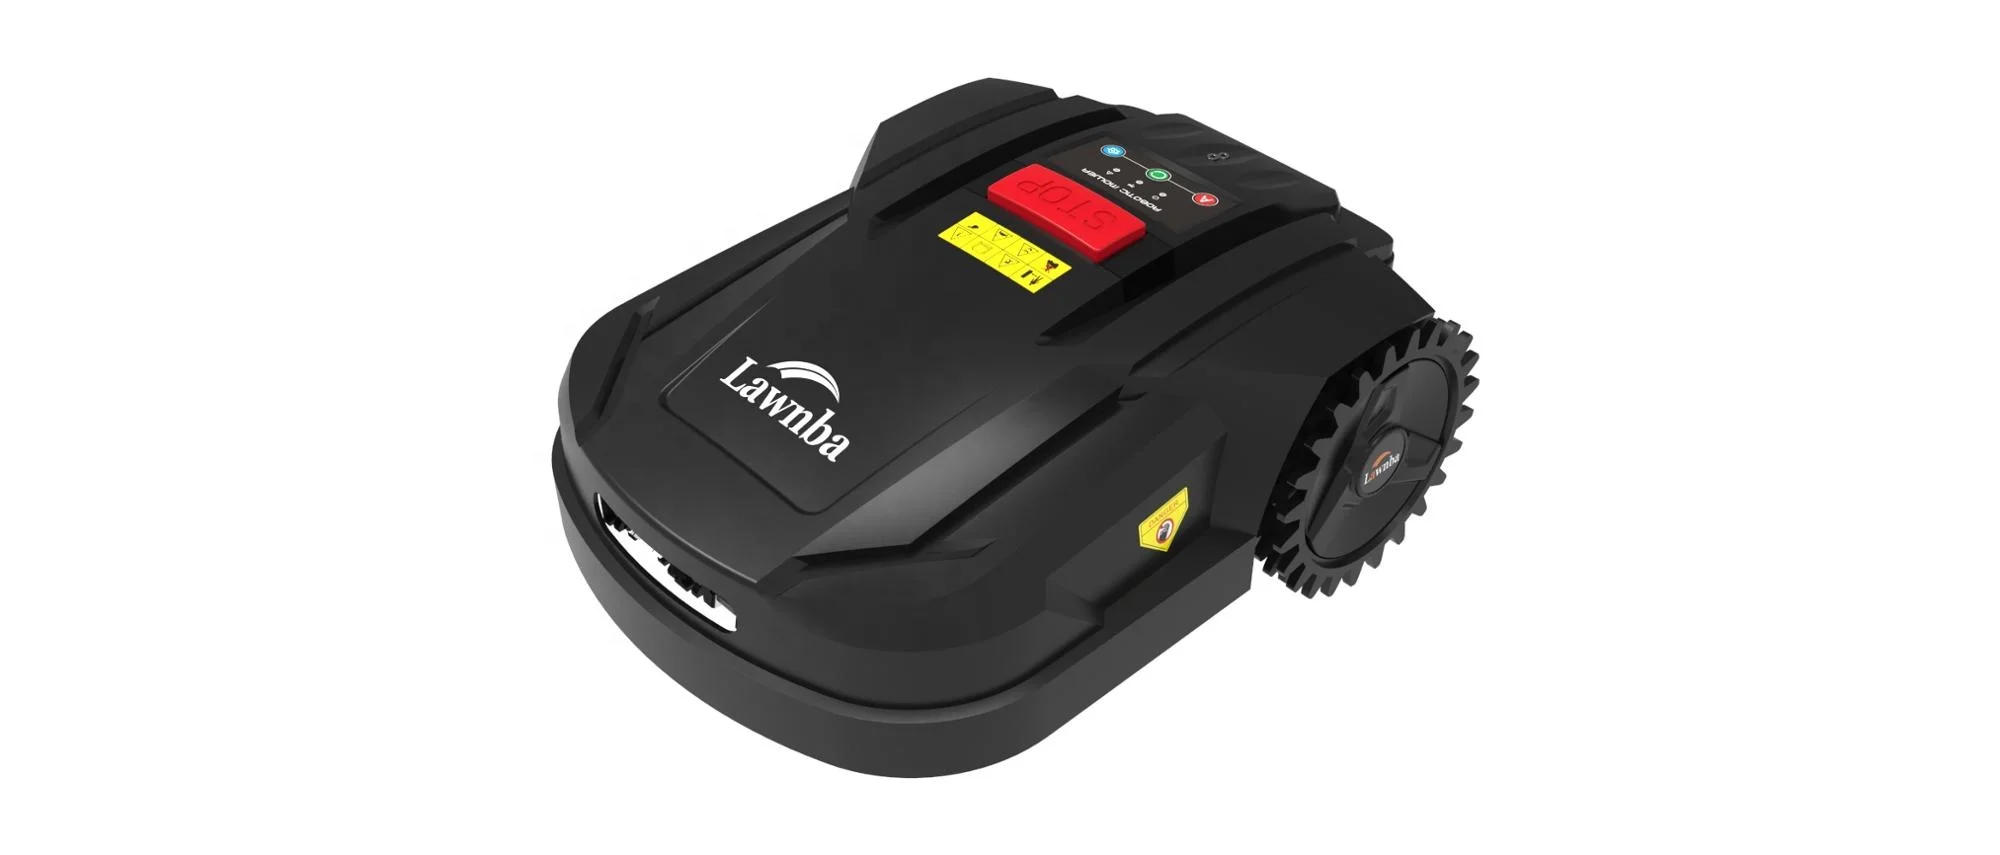 

Battery Power Grass mower with subarea setting economical auto mower H750 robot lawn mower